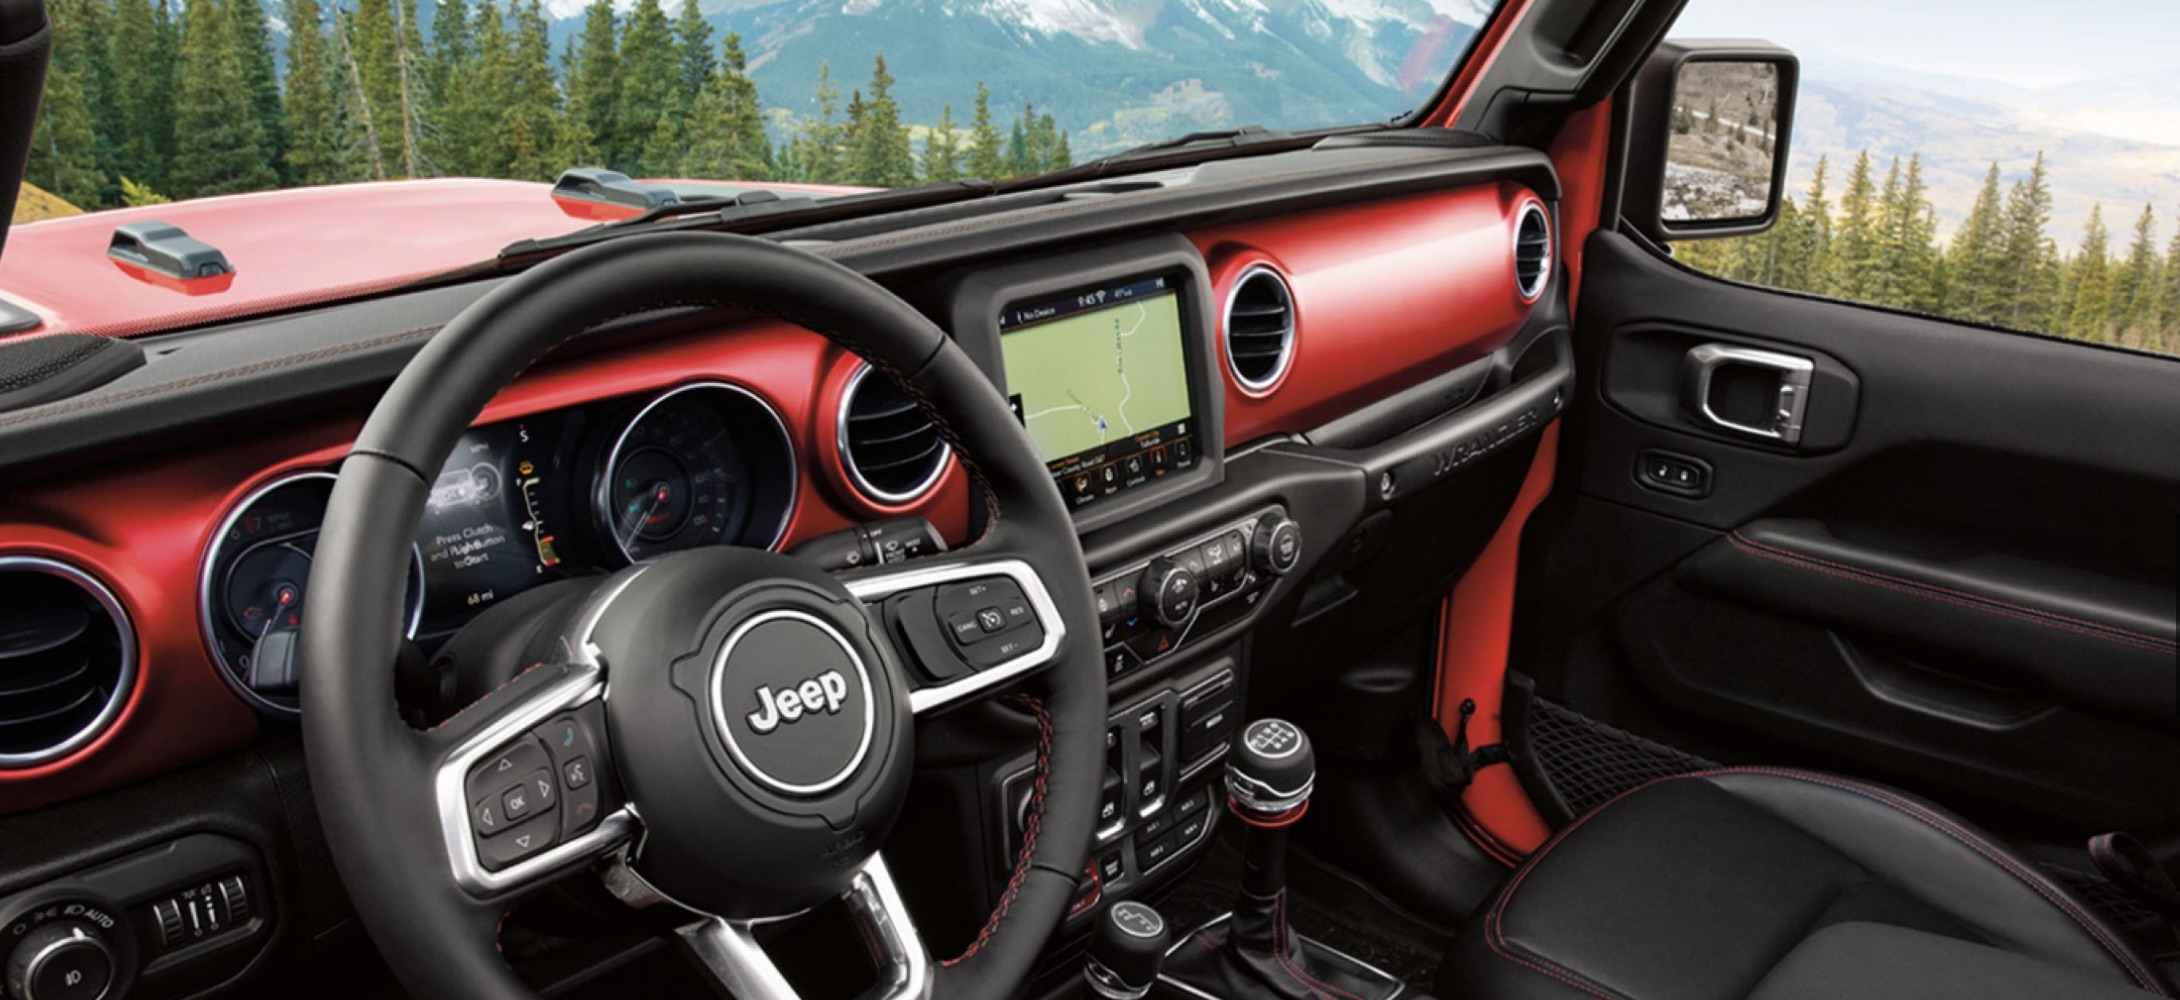 2020 Jeep Wrangler Unlimited Interior Review